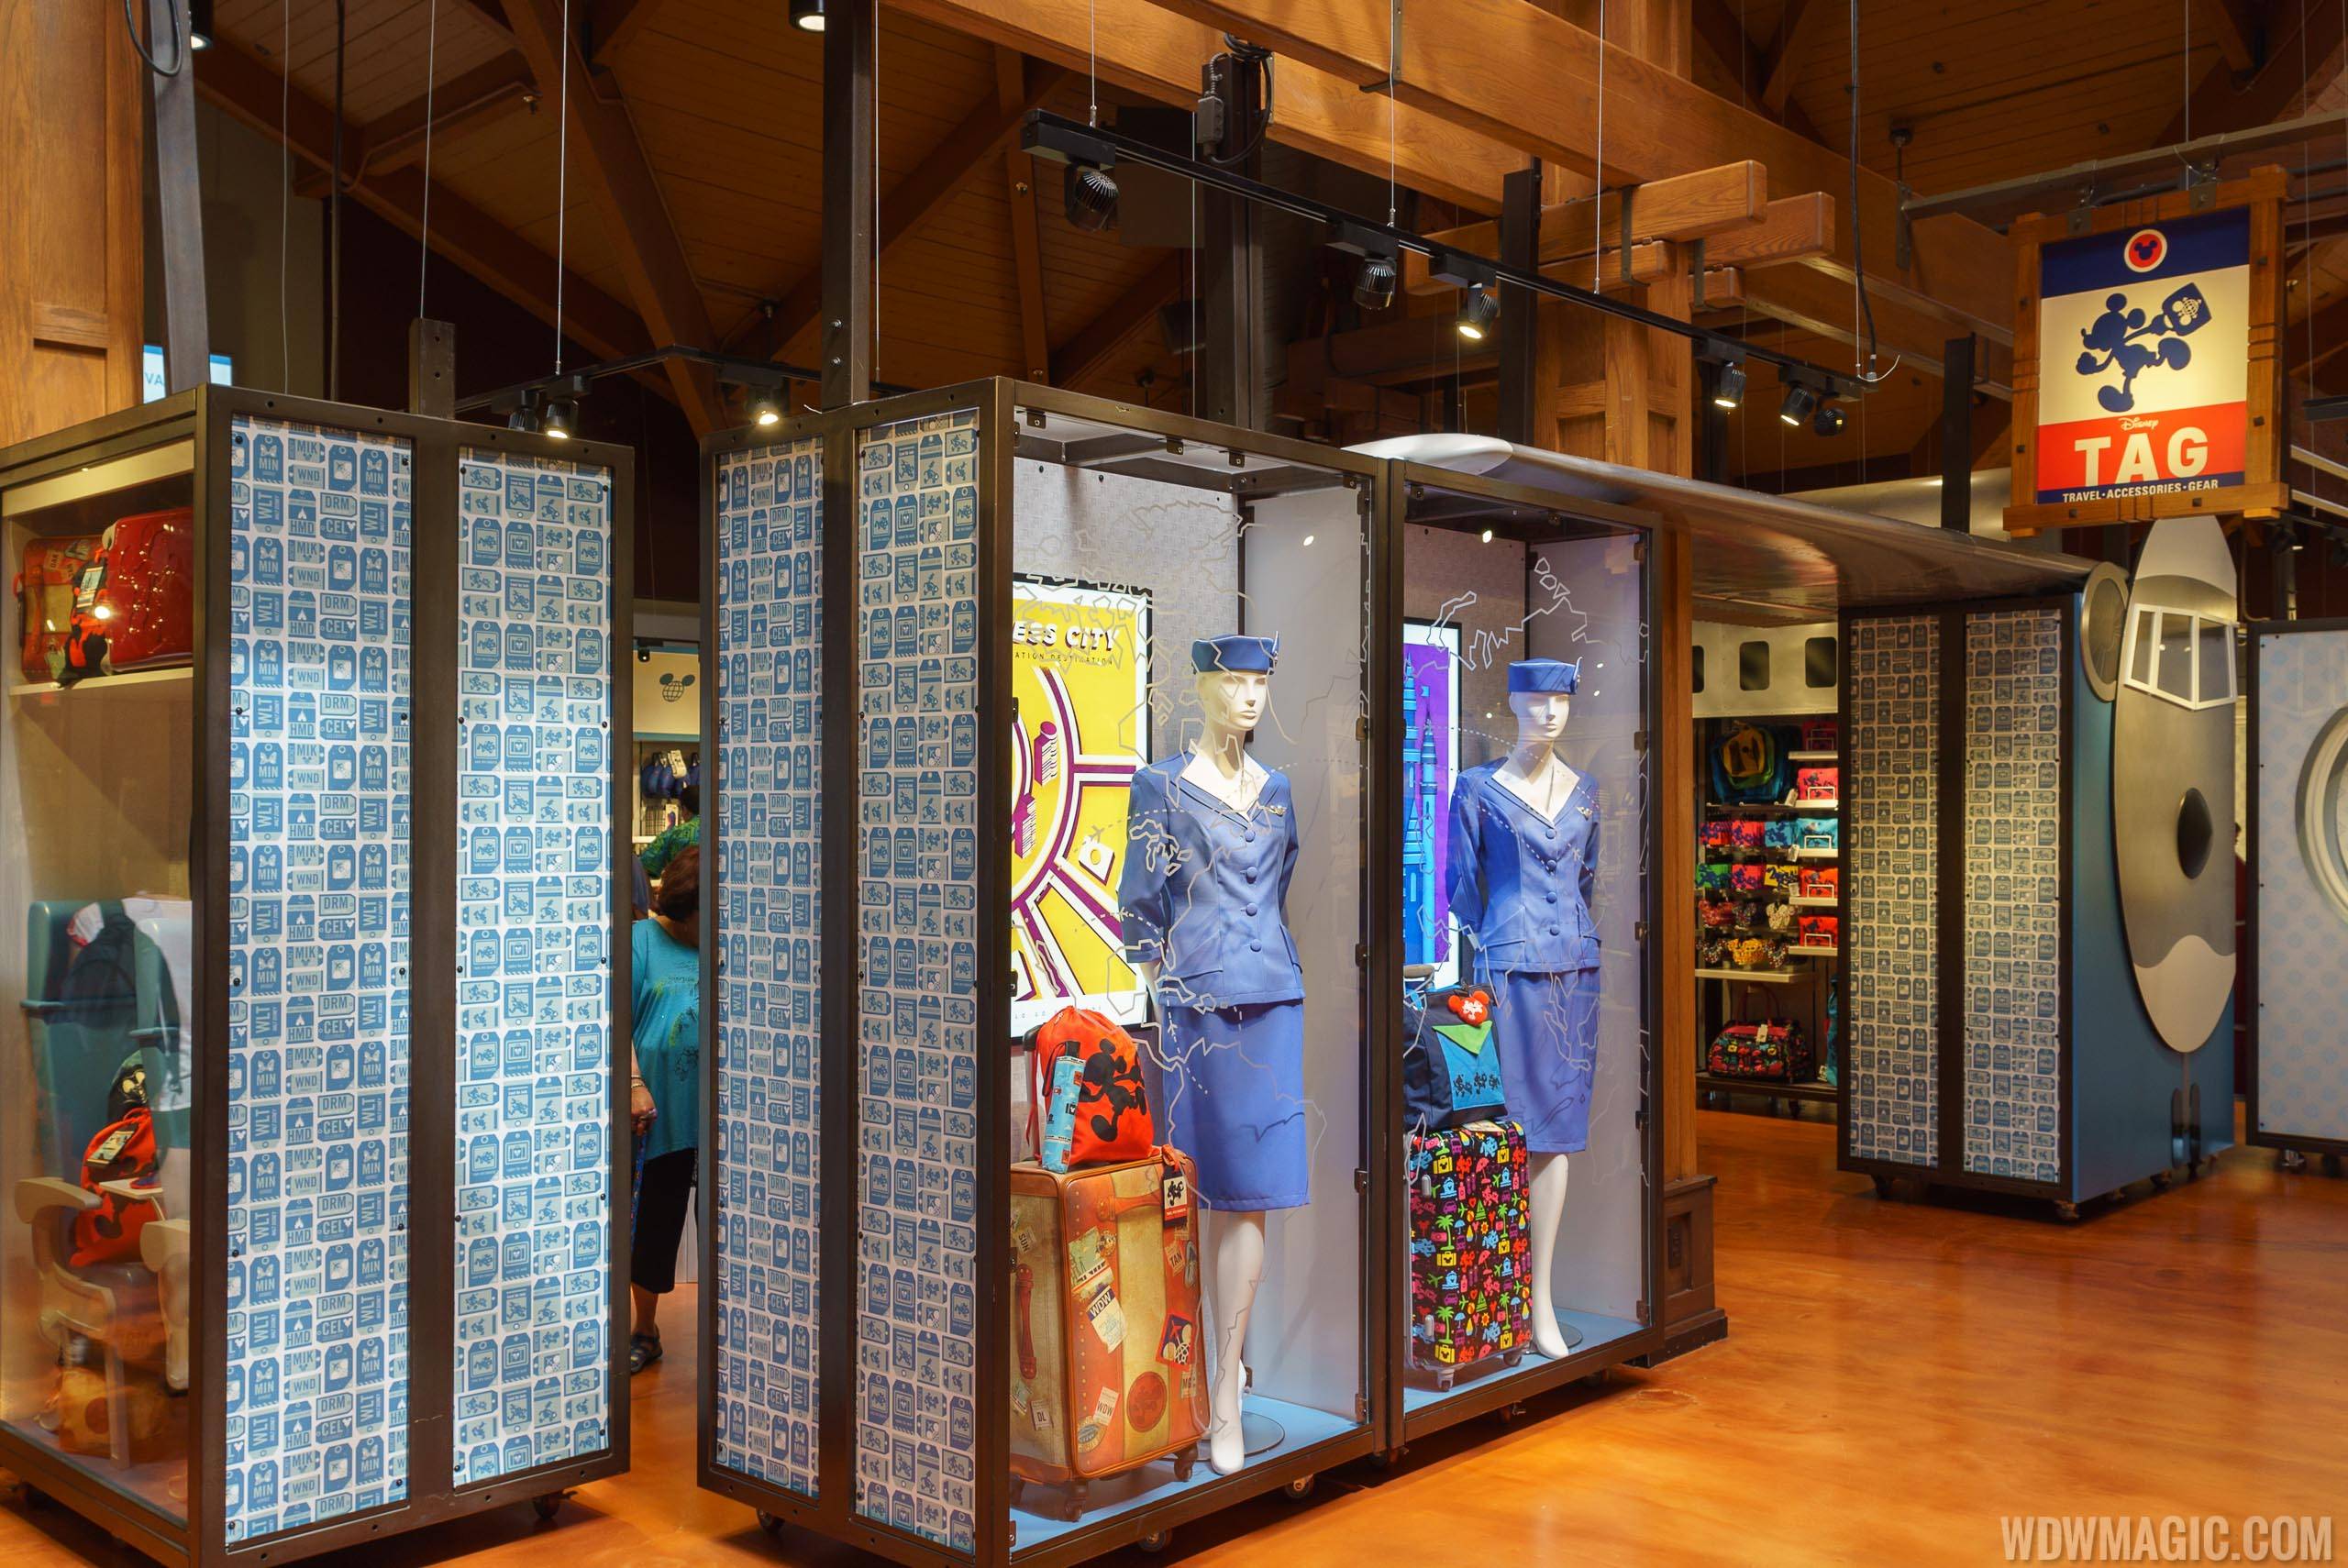 PHOTOS - Disney TAG store opens at the Marketplace Co-Op